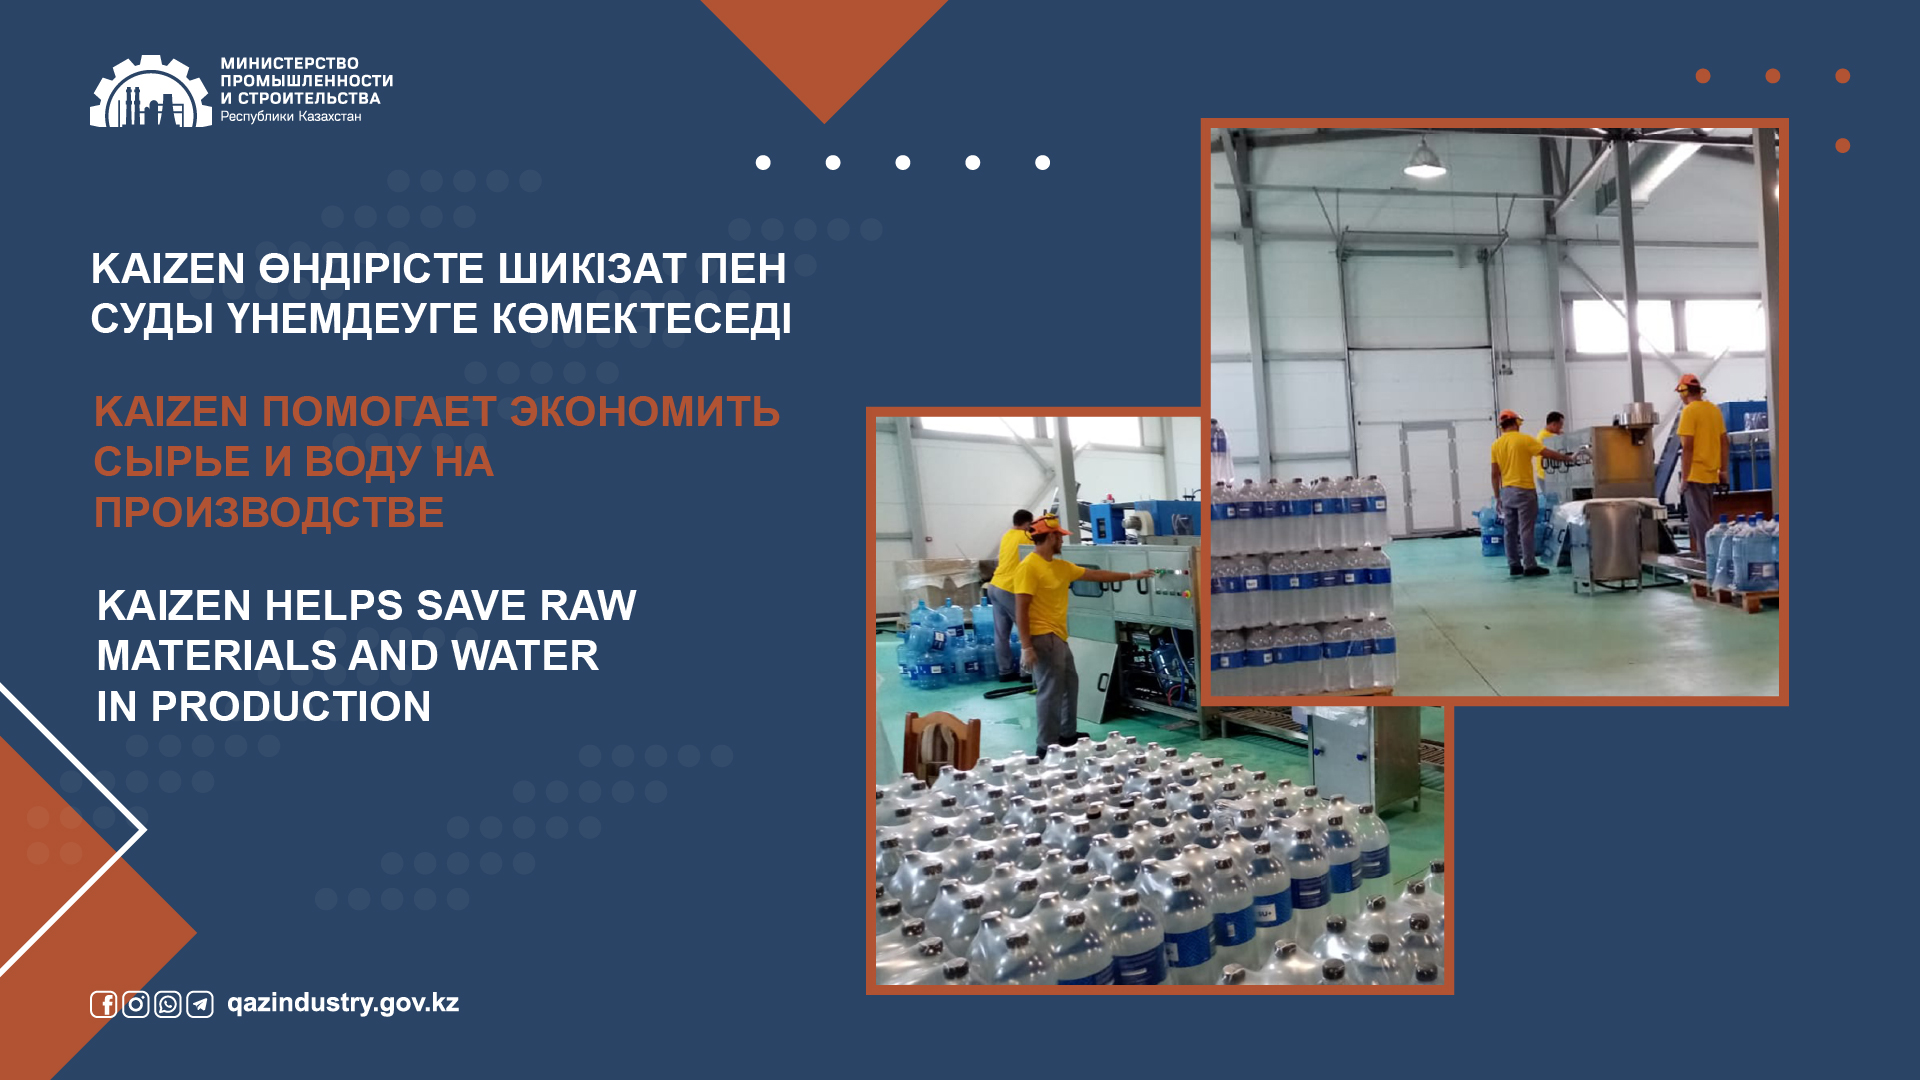 Kaizen helps save raw materials and water in production